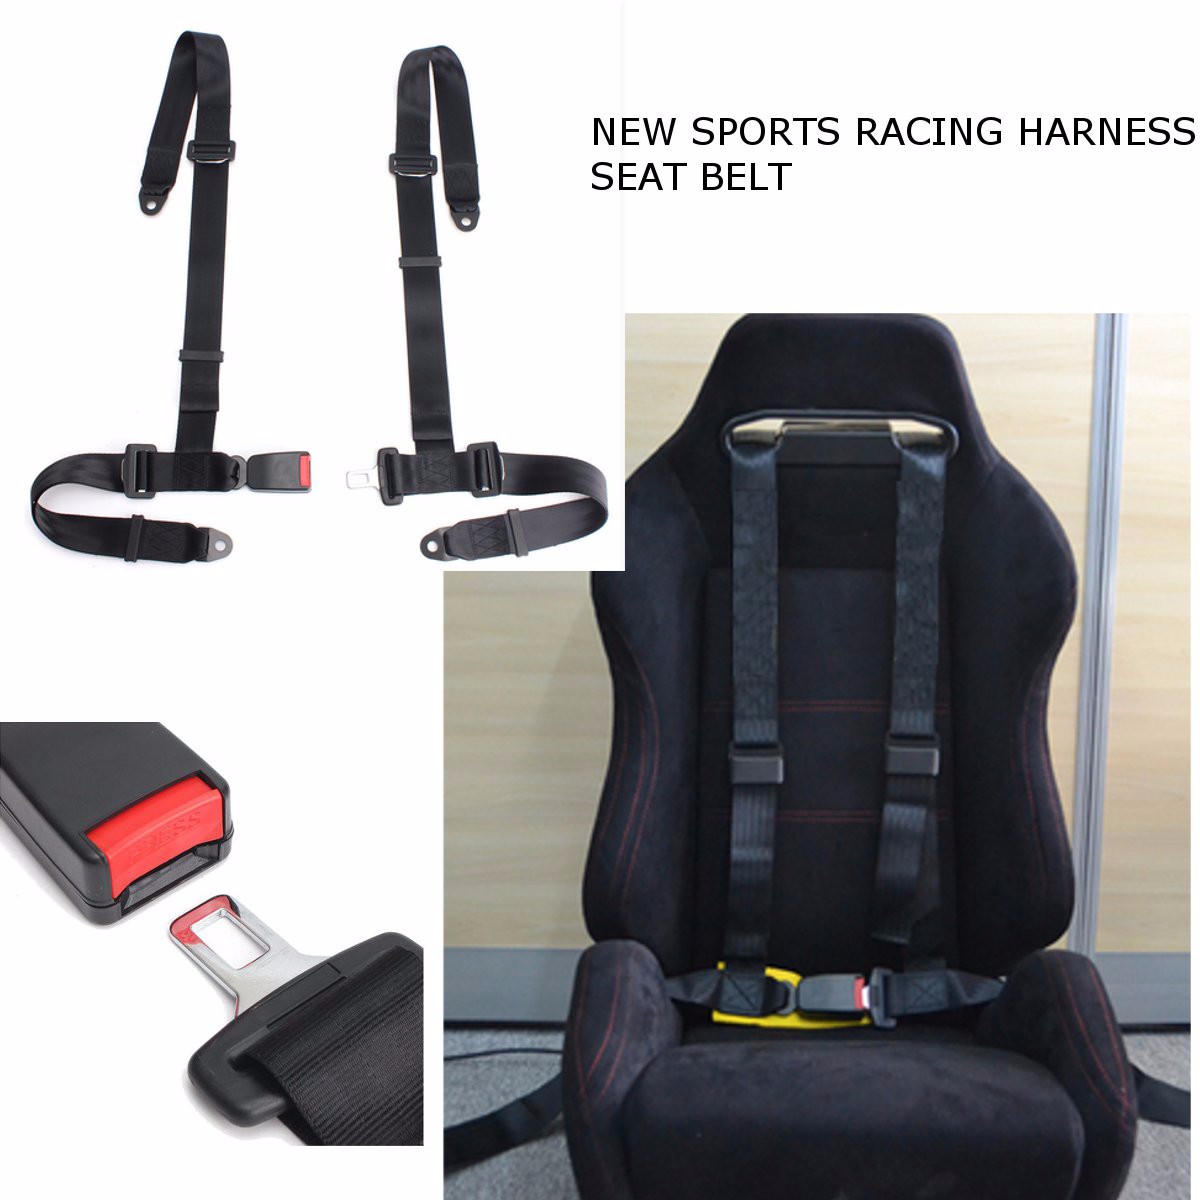 Sport racing car harness safety seatbelt 3 4 point fixing mounting quick release